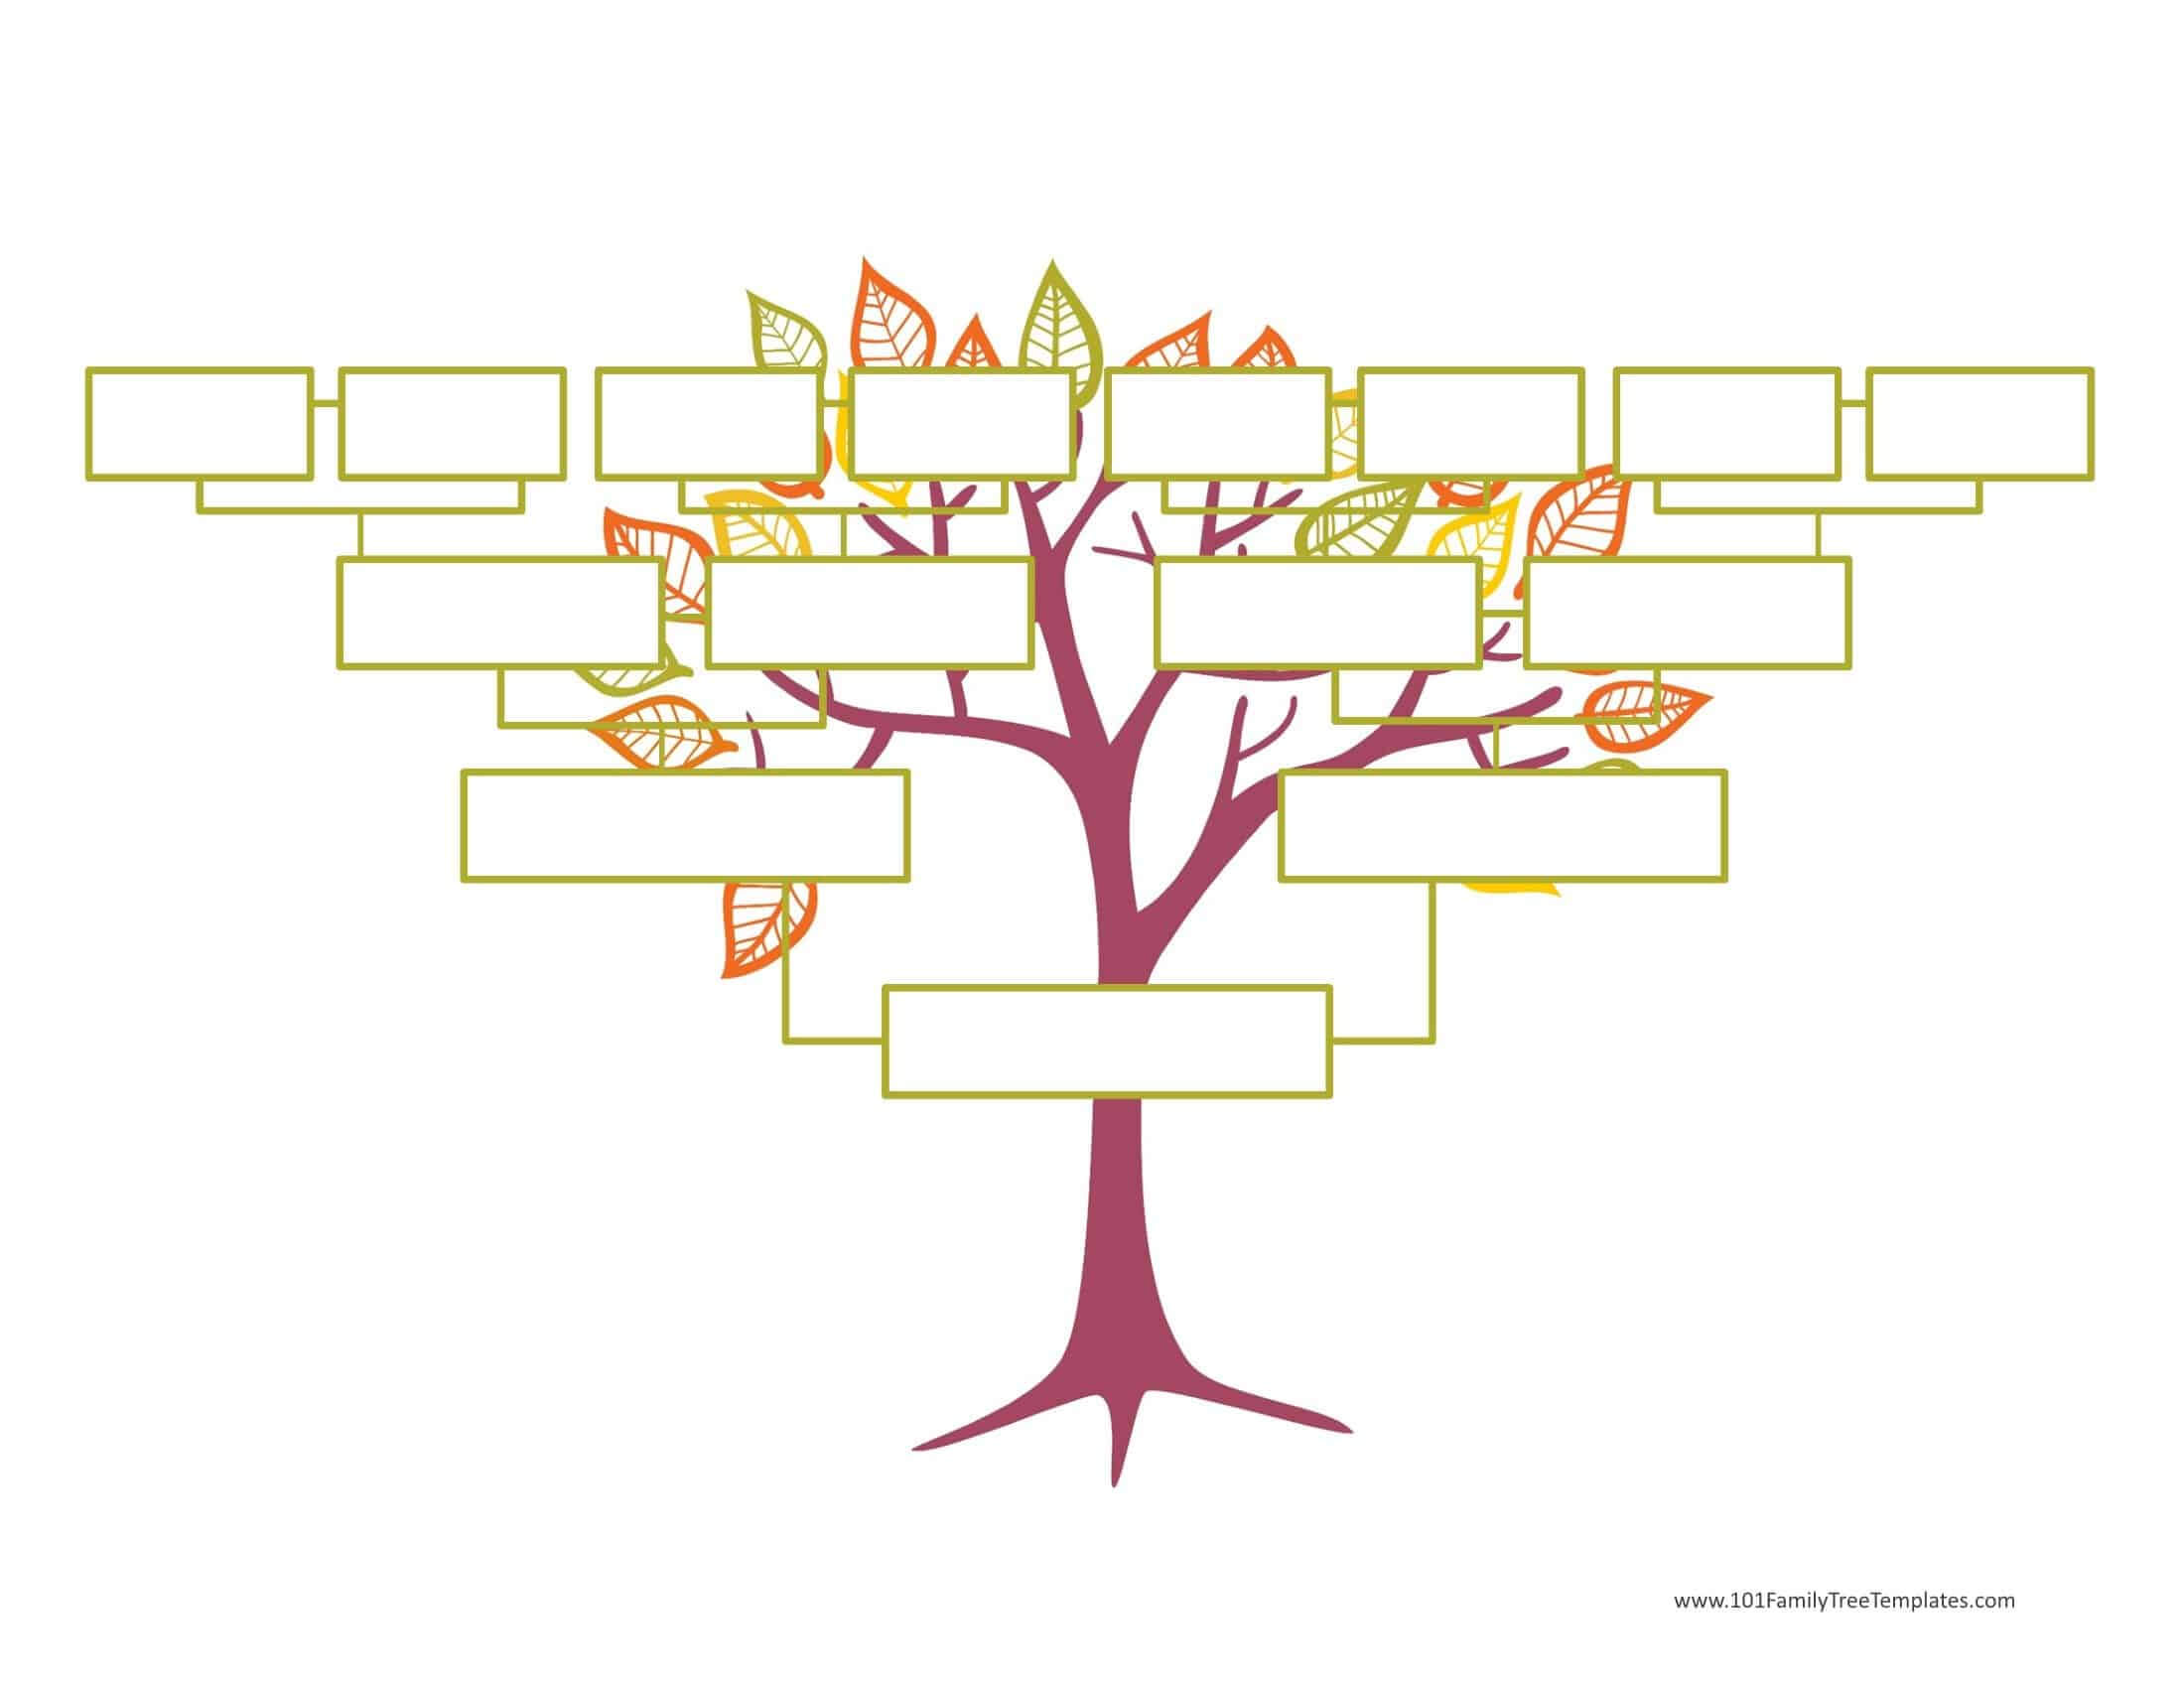 Blank Family Tree Template | Free Instant Download Intended For Blank Tree Diagram Template